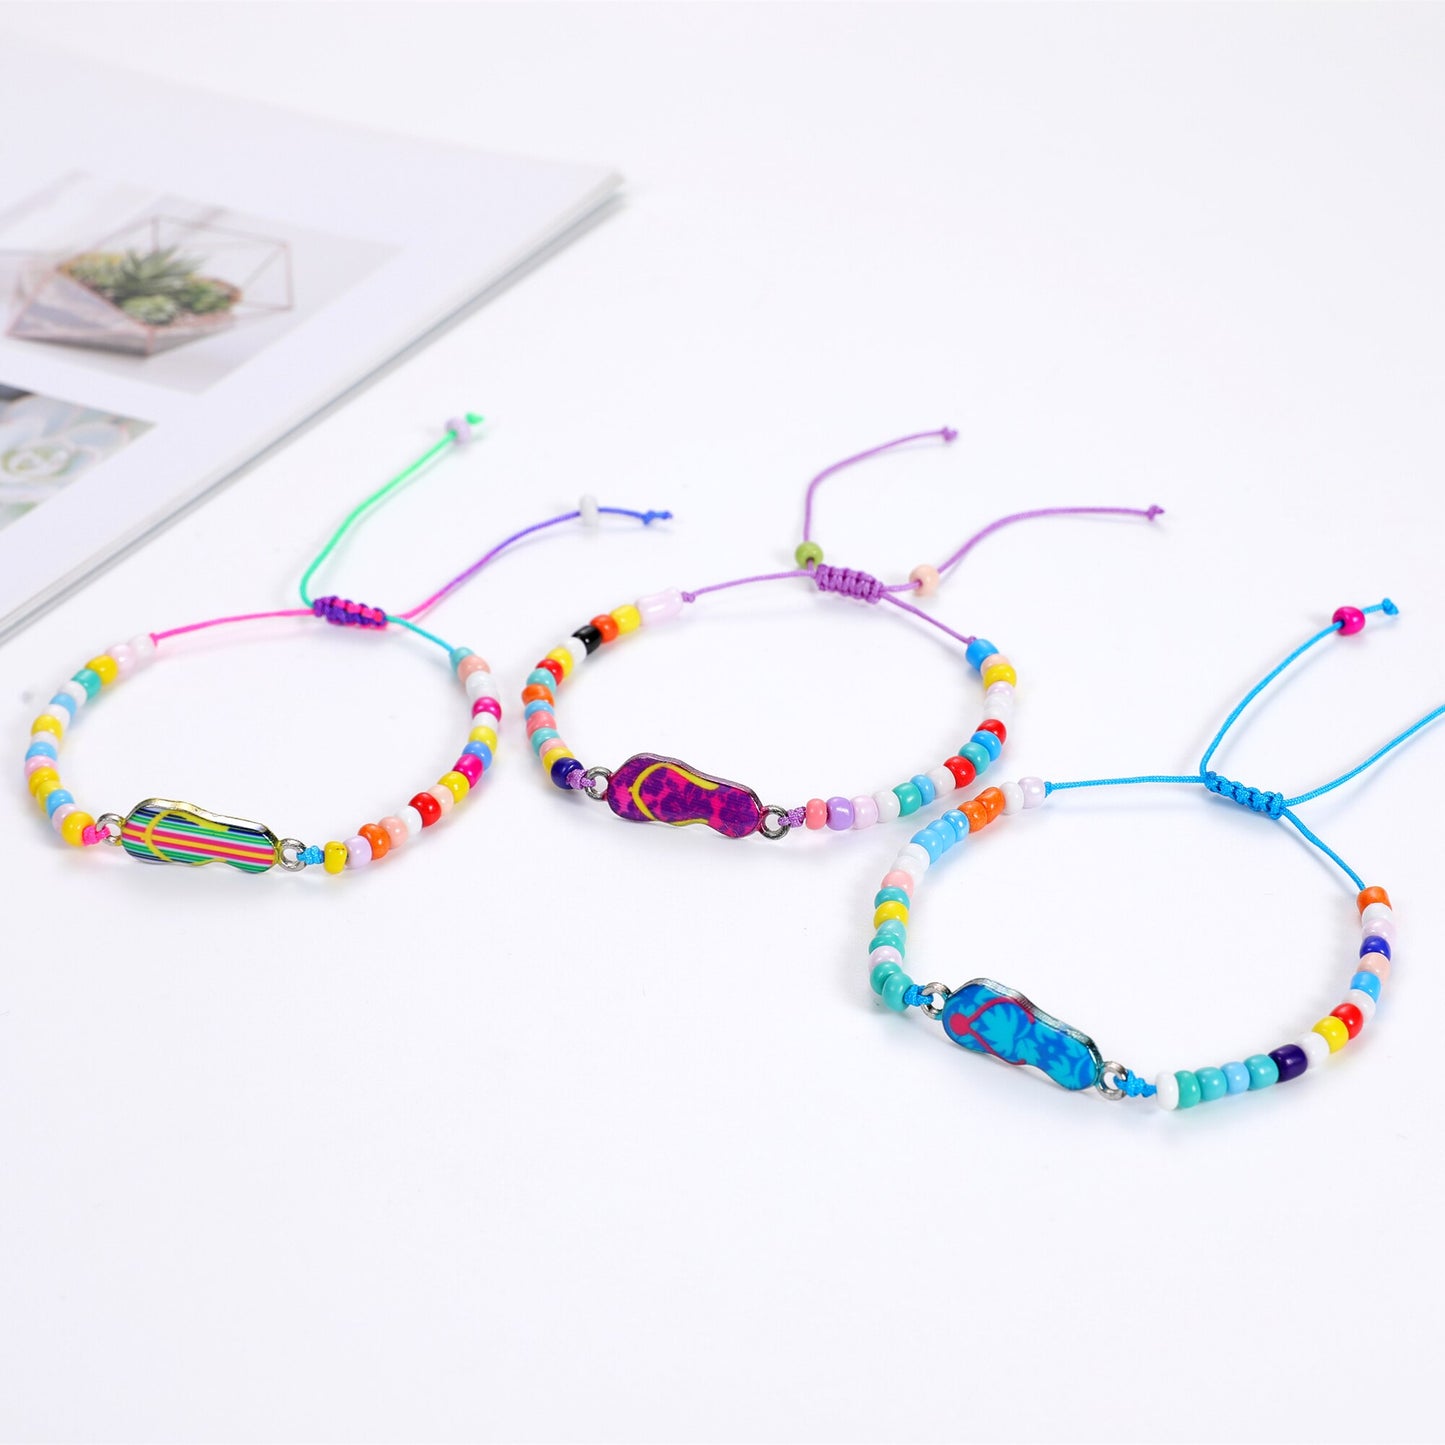 12 Pcs Creative Colorful Oil Painting Slippers Charm Bracelet for Girl Kids Handmade Bead Braided Chain Friendship BFF Gift